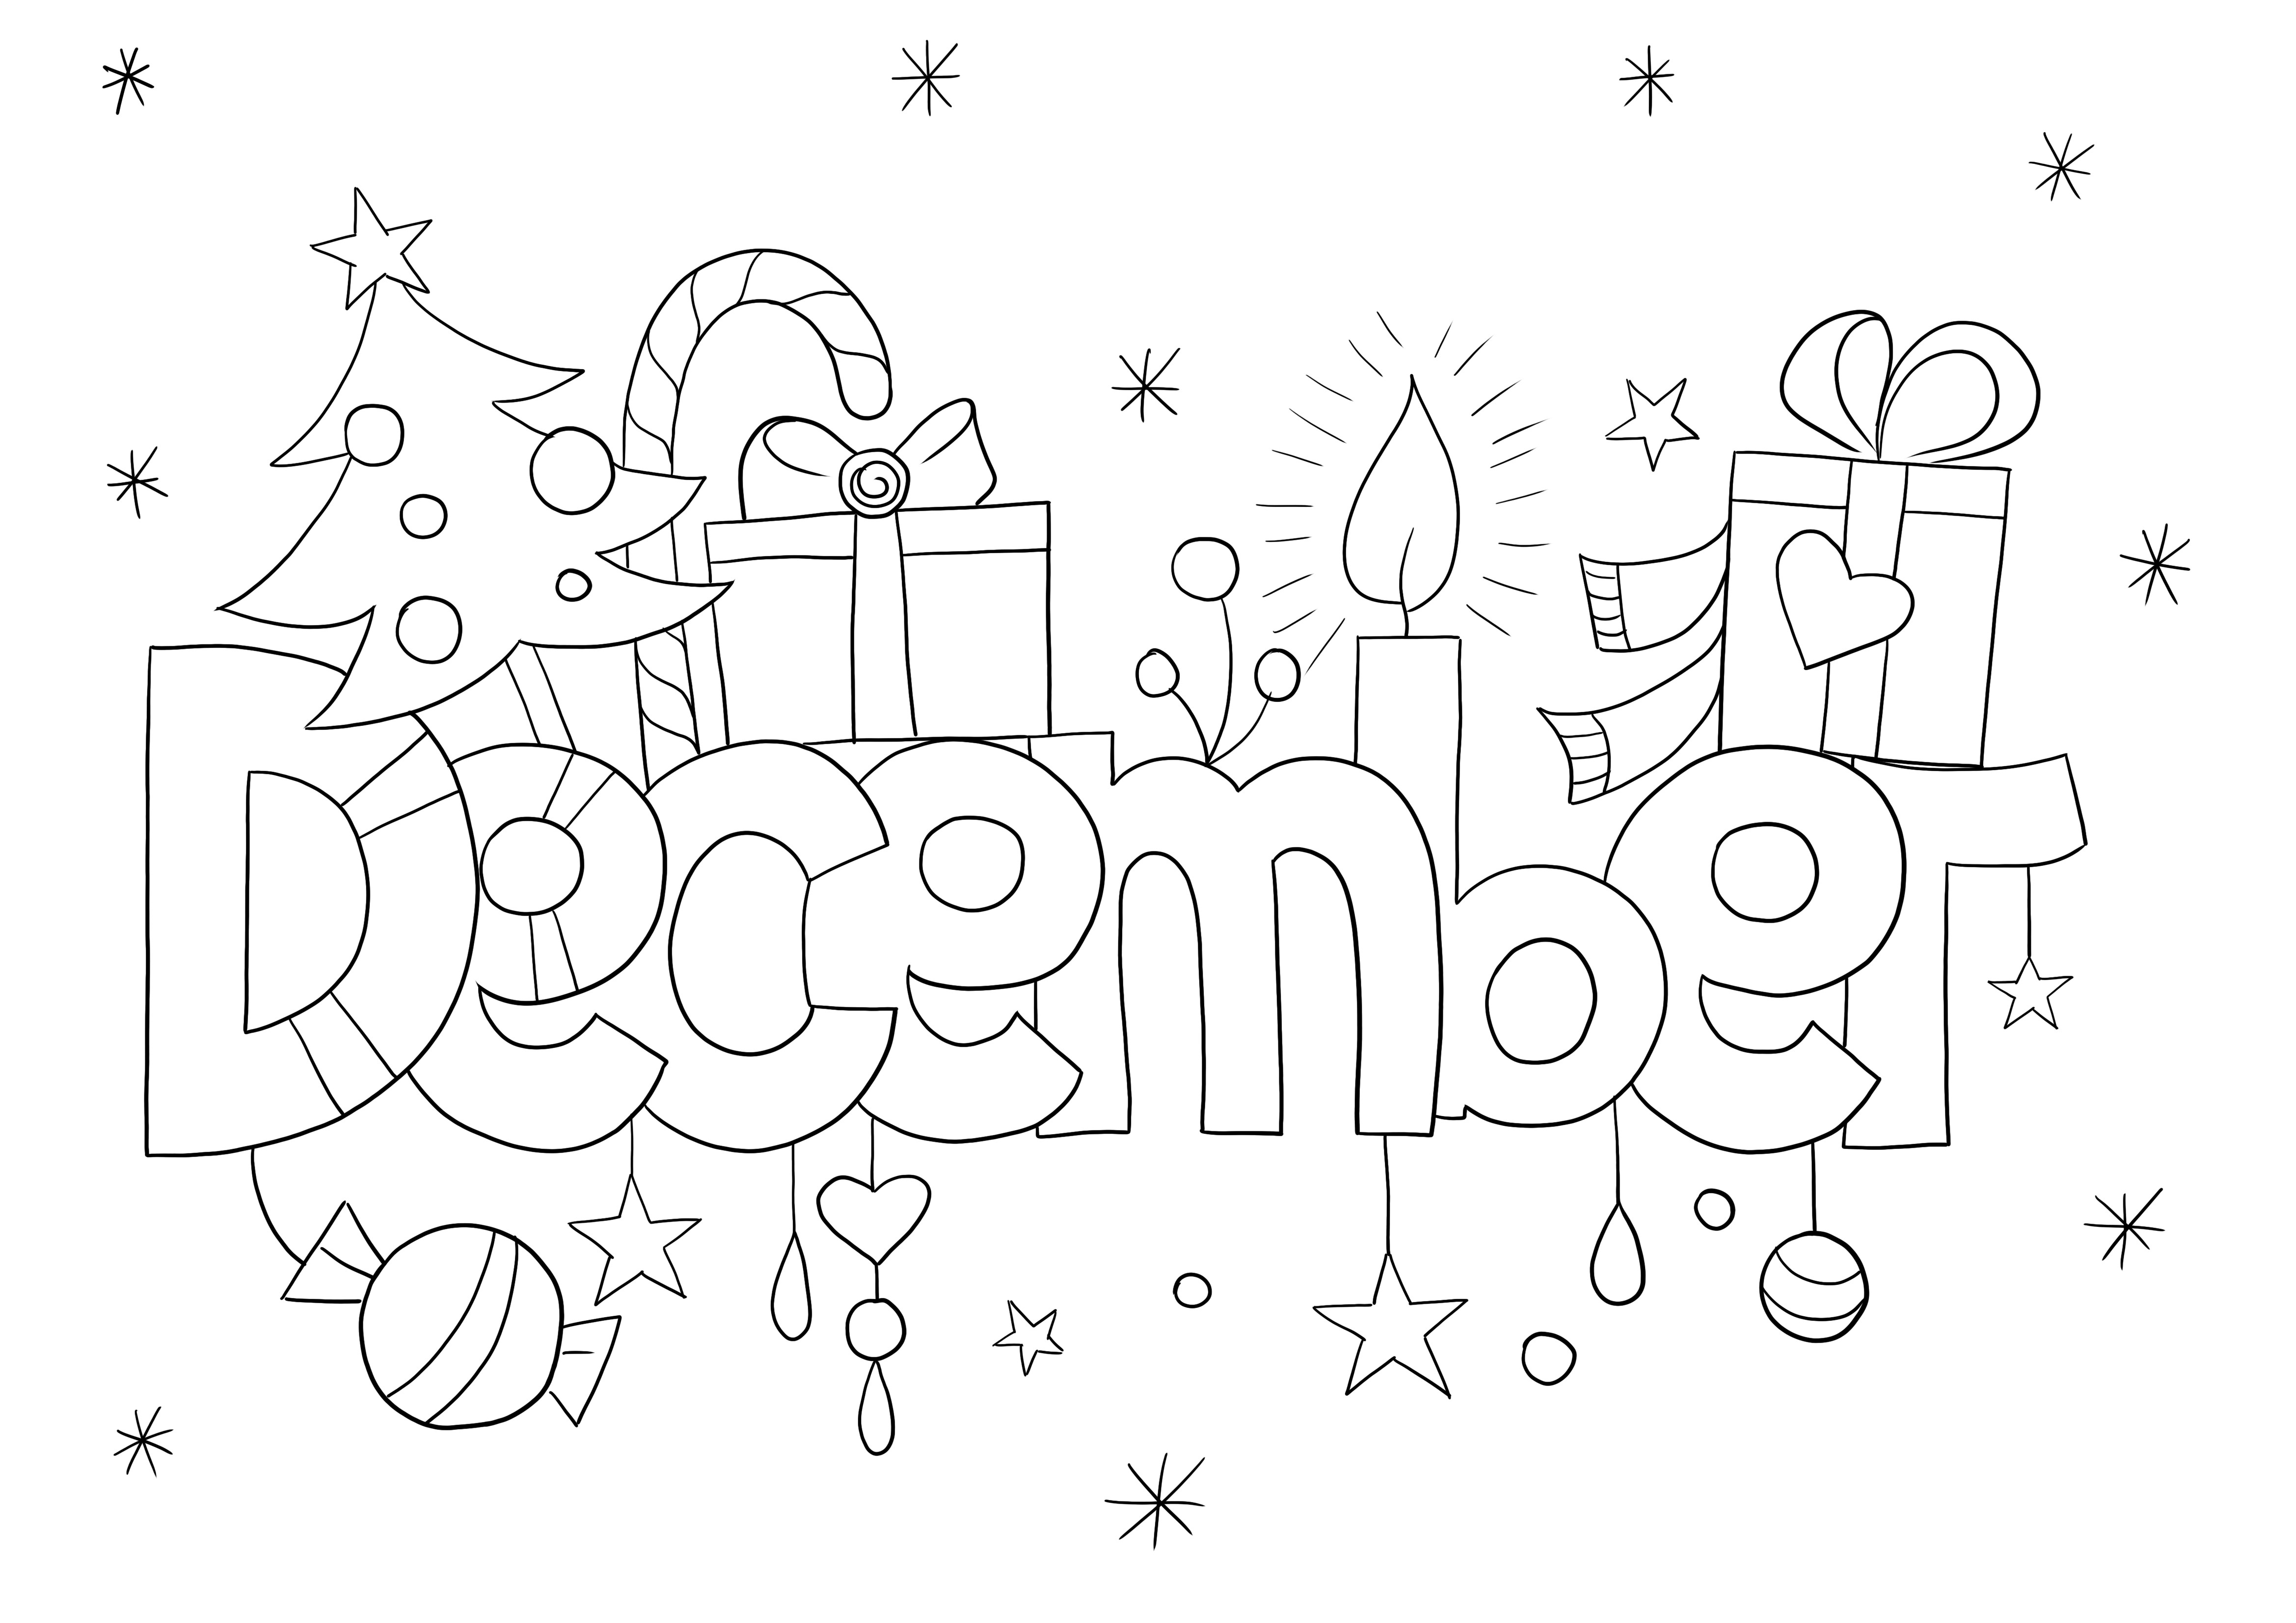 December month image to print and color for free